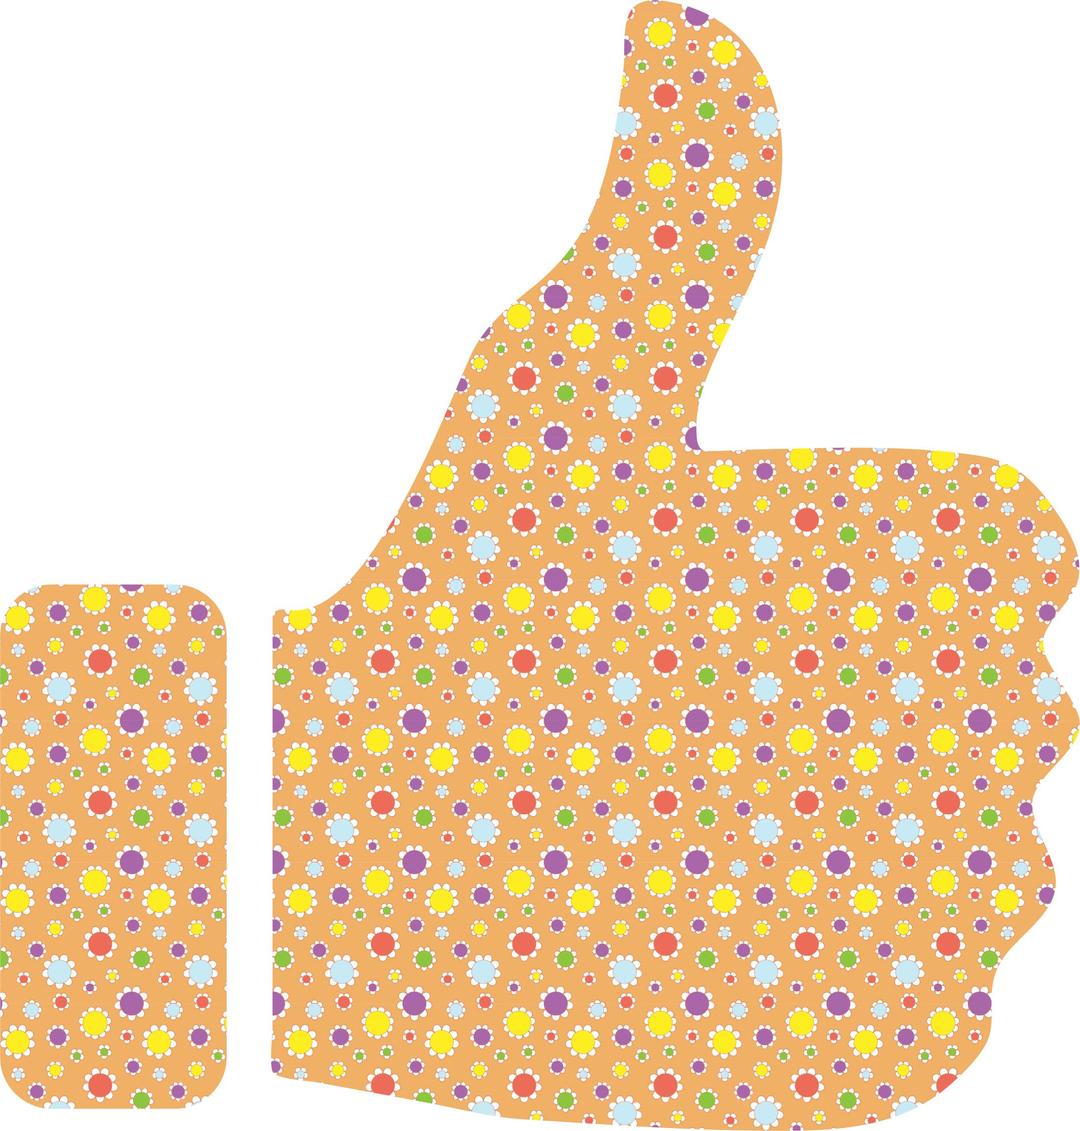 Cute Floral Thumbs Up png transparent